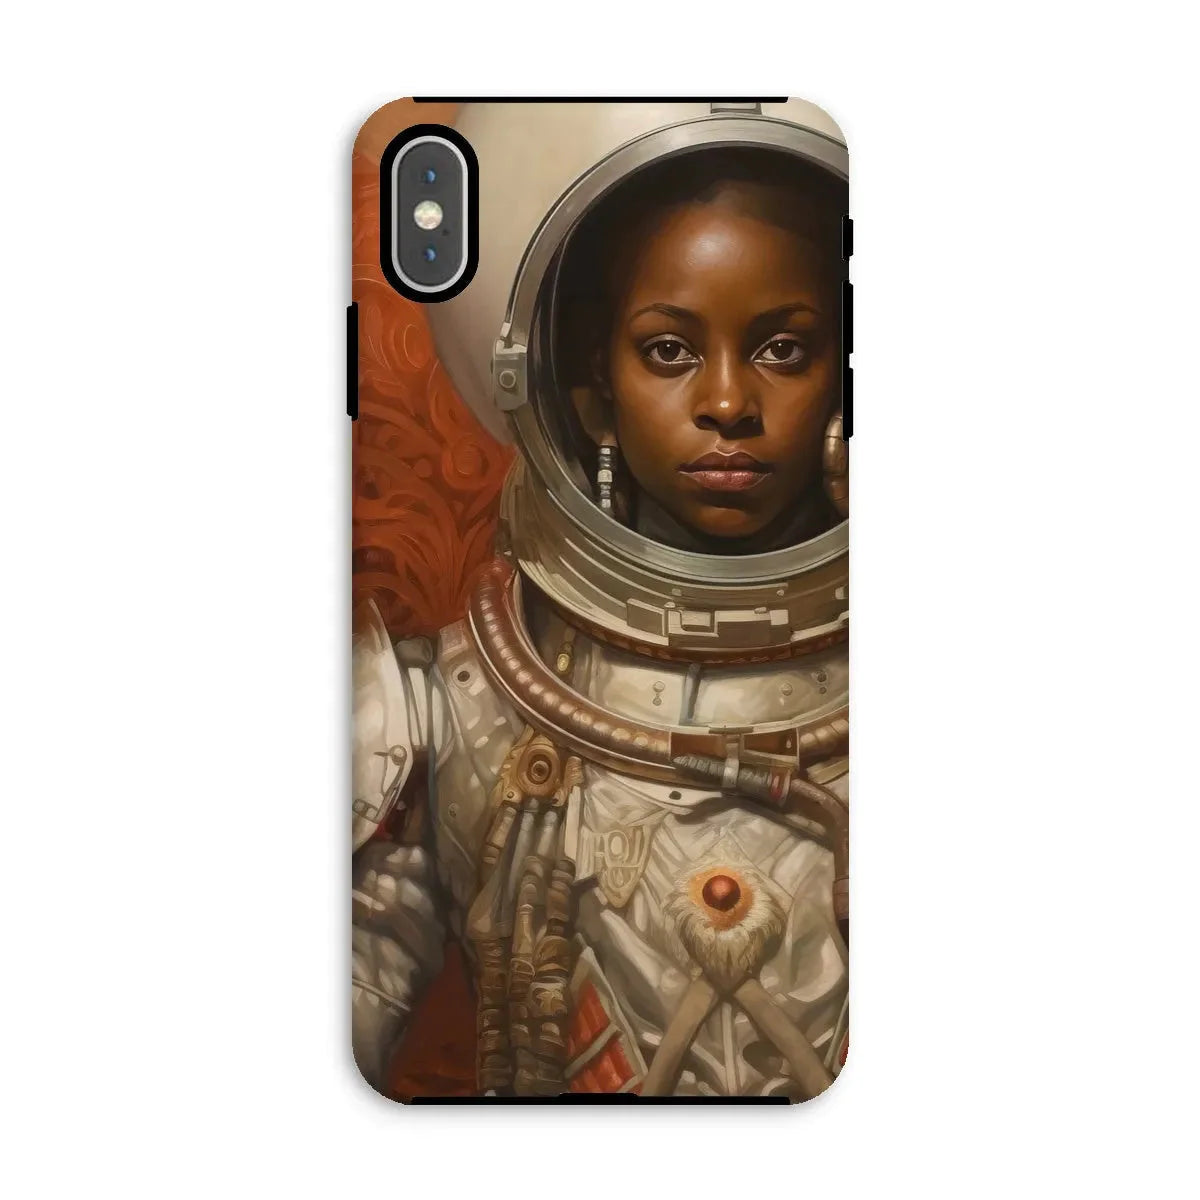 Ava The Lesbian Astronaut - Sapphic Aesthetic Phone Case - Iphone Xs Max / Matte - Mobile Phone Cases - Aesthetic Art